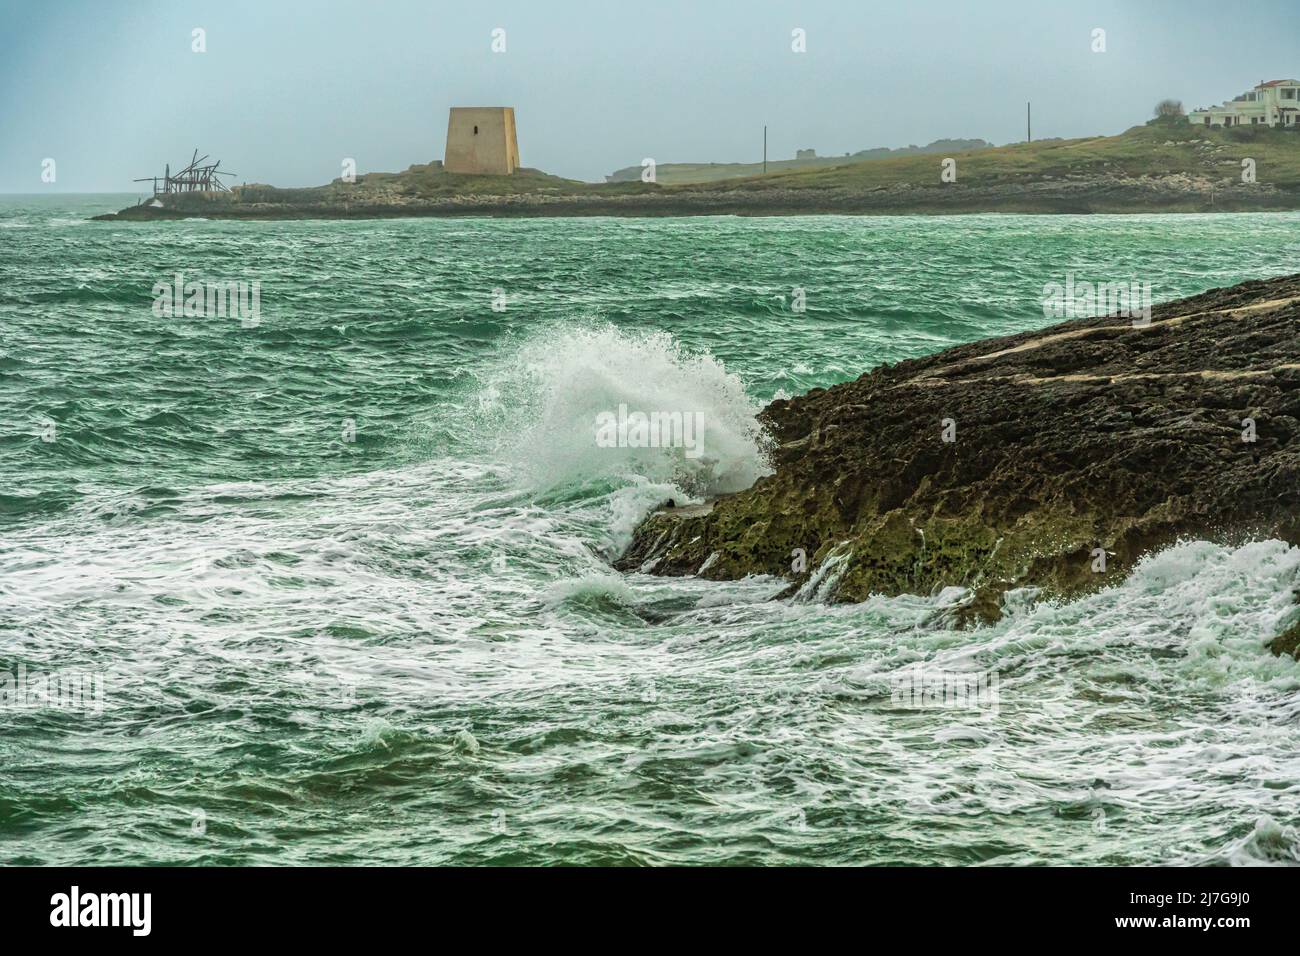 The stormy sea crashes against the rocky coasts of Puglia, in the background the Gusmay tower, a watchtower, and an trabucco. Peschici, Puglia Stock Photo